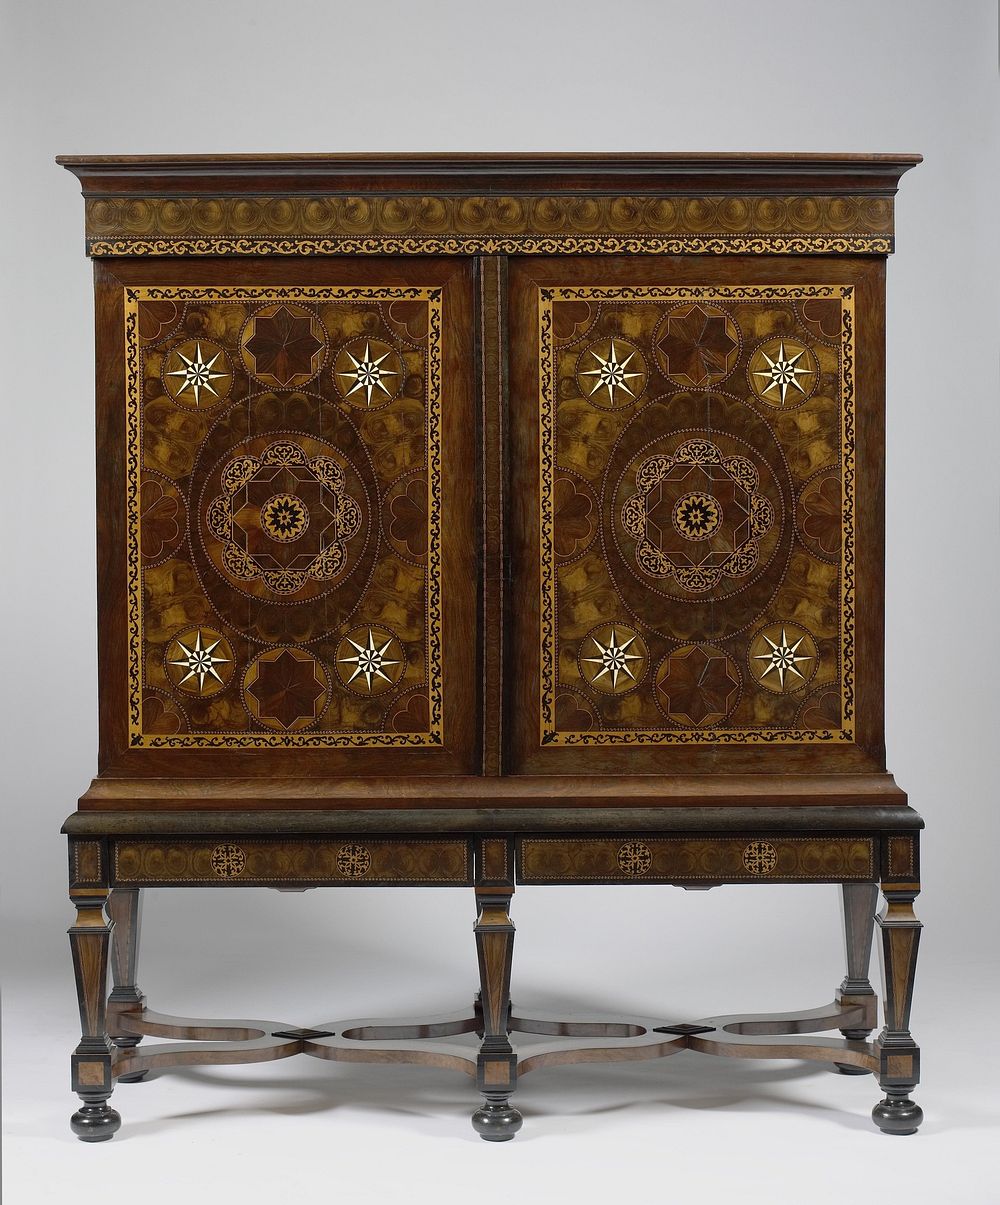 Cabinet (c. 1690 - c. 1710) by anonymous